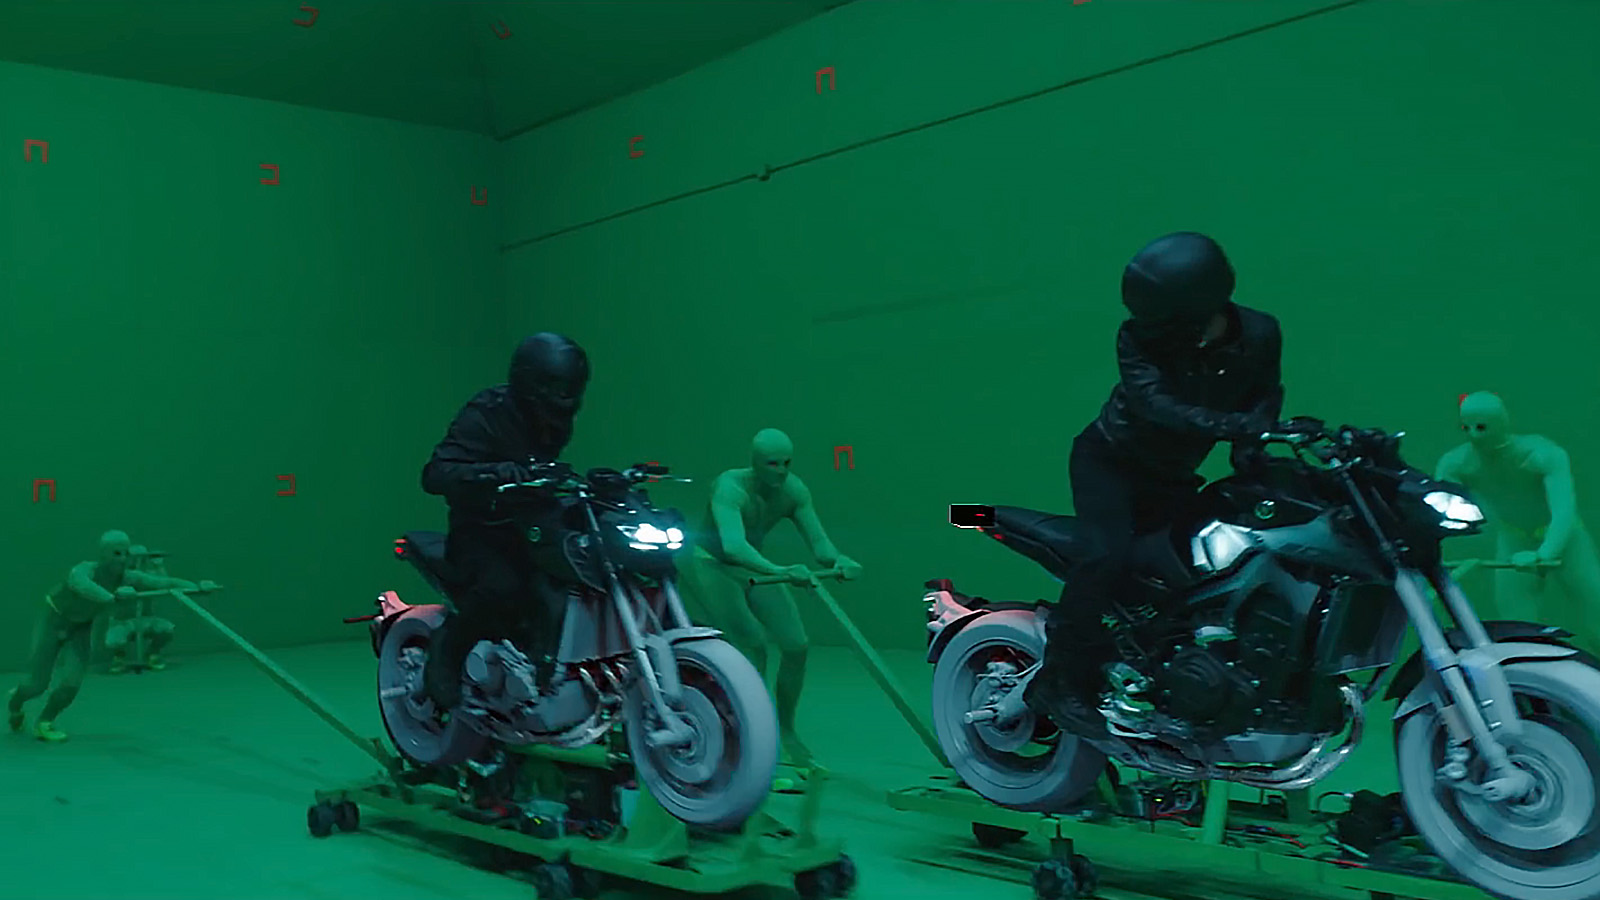 The nature of green-screen footage leaves a lot to the imagination. Image from John Wick: Parabellum © Image Engine VFX